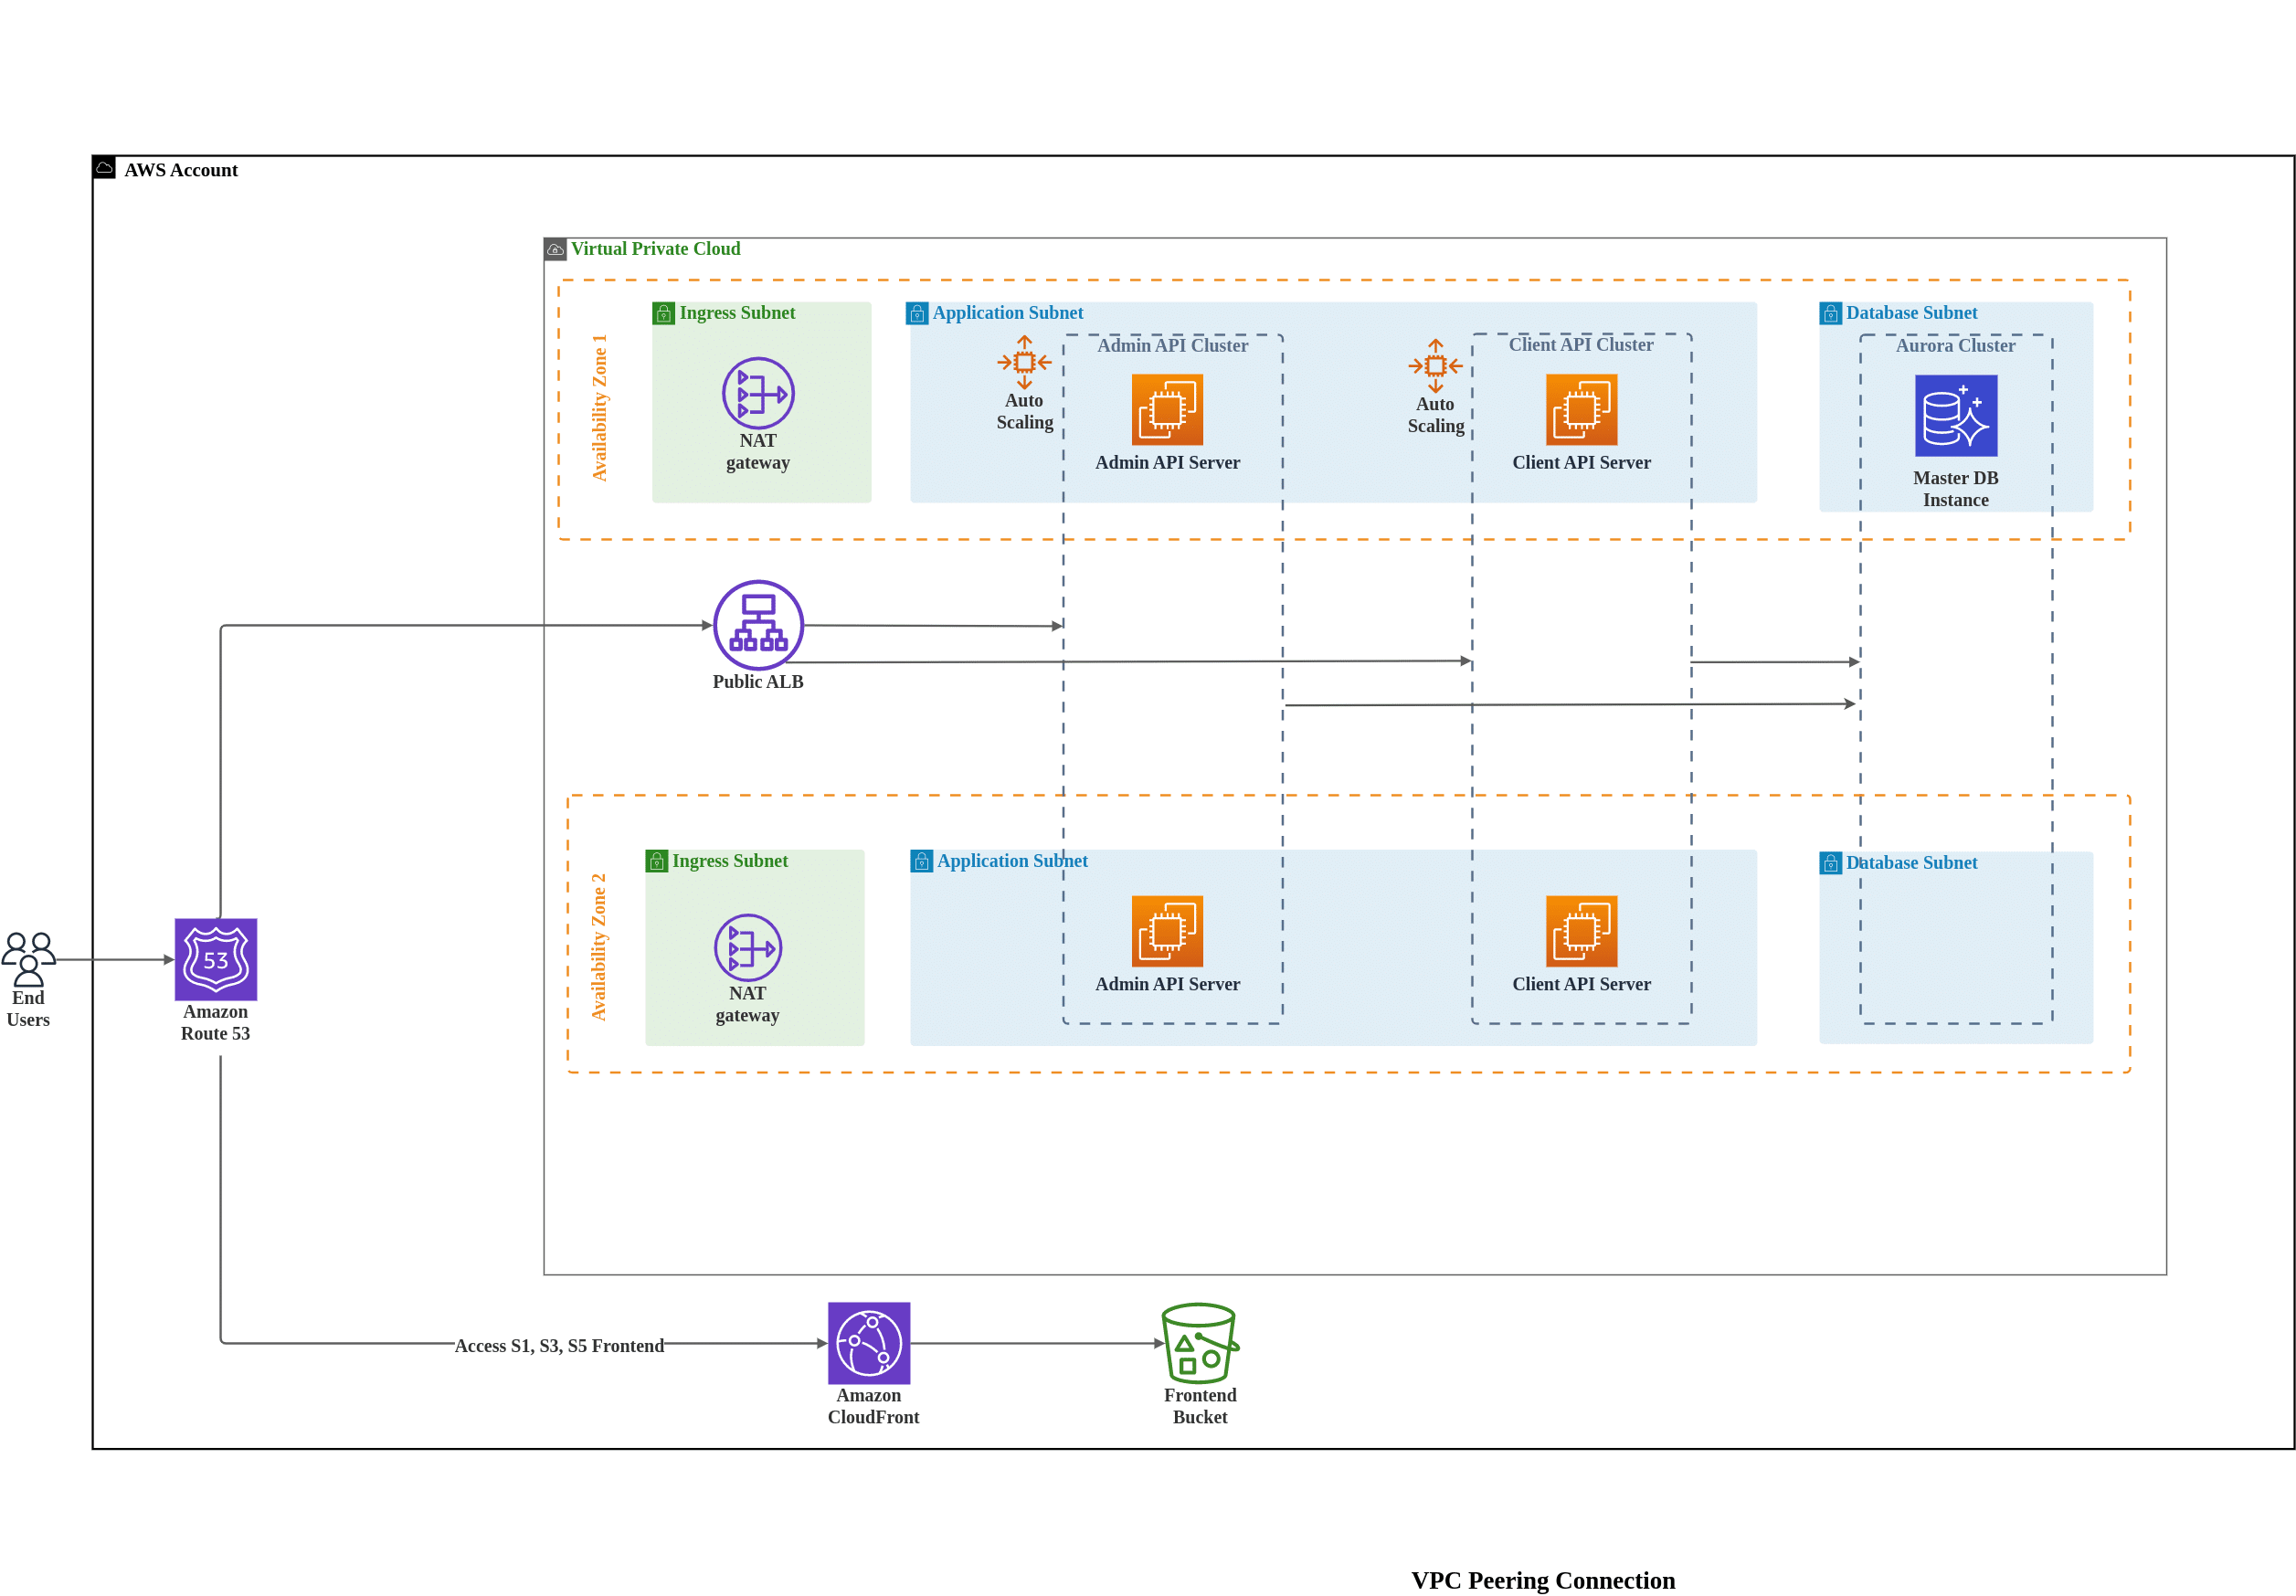 Building Veterinary clinic management system on AWS Cloud: Challenges & Solutions